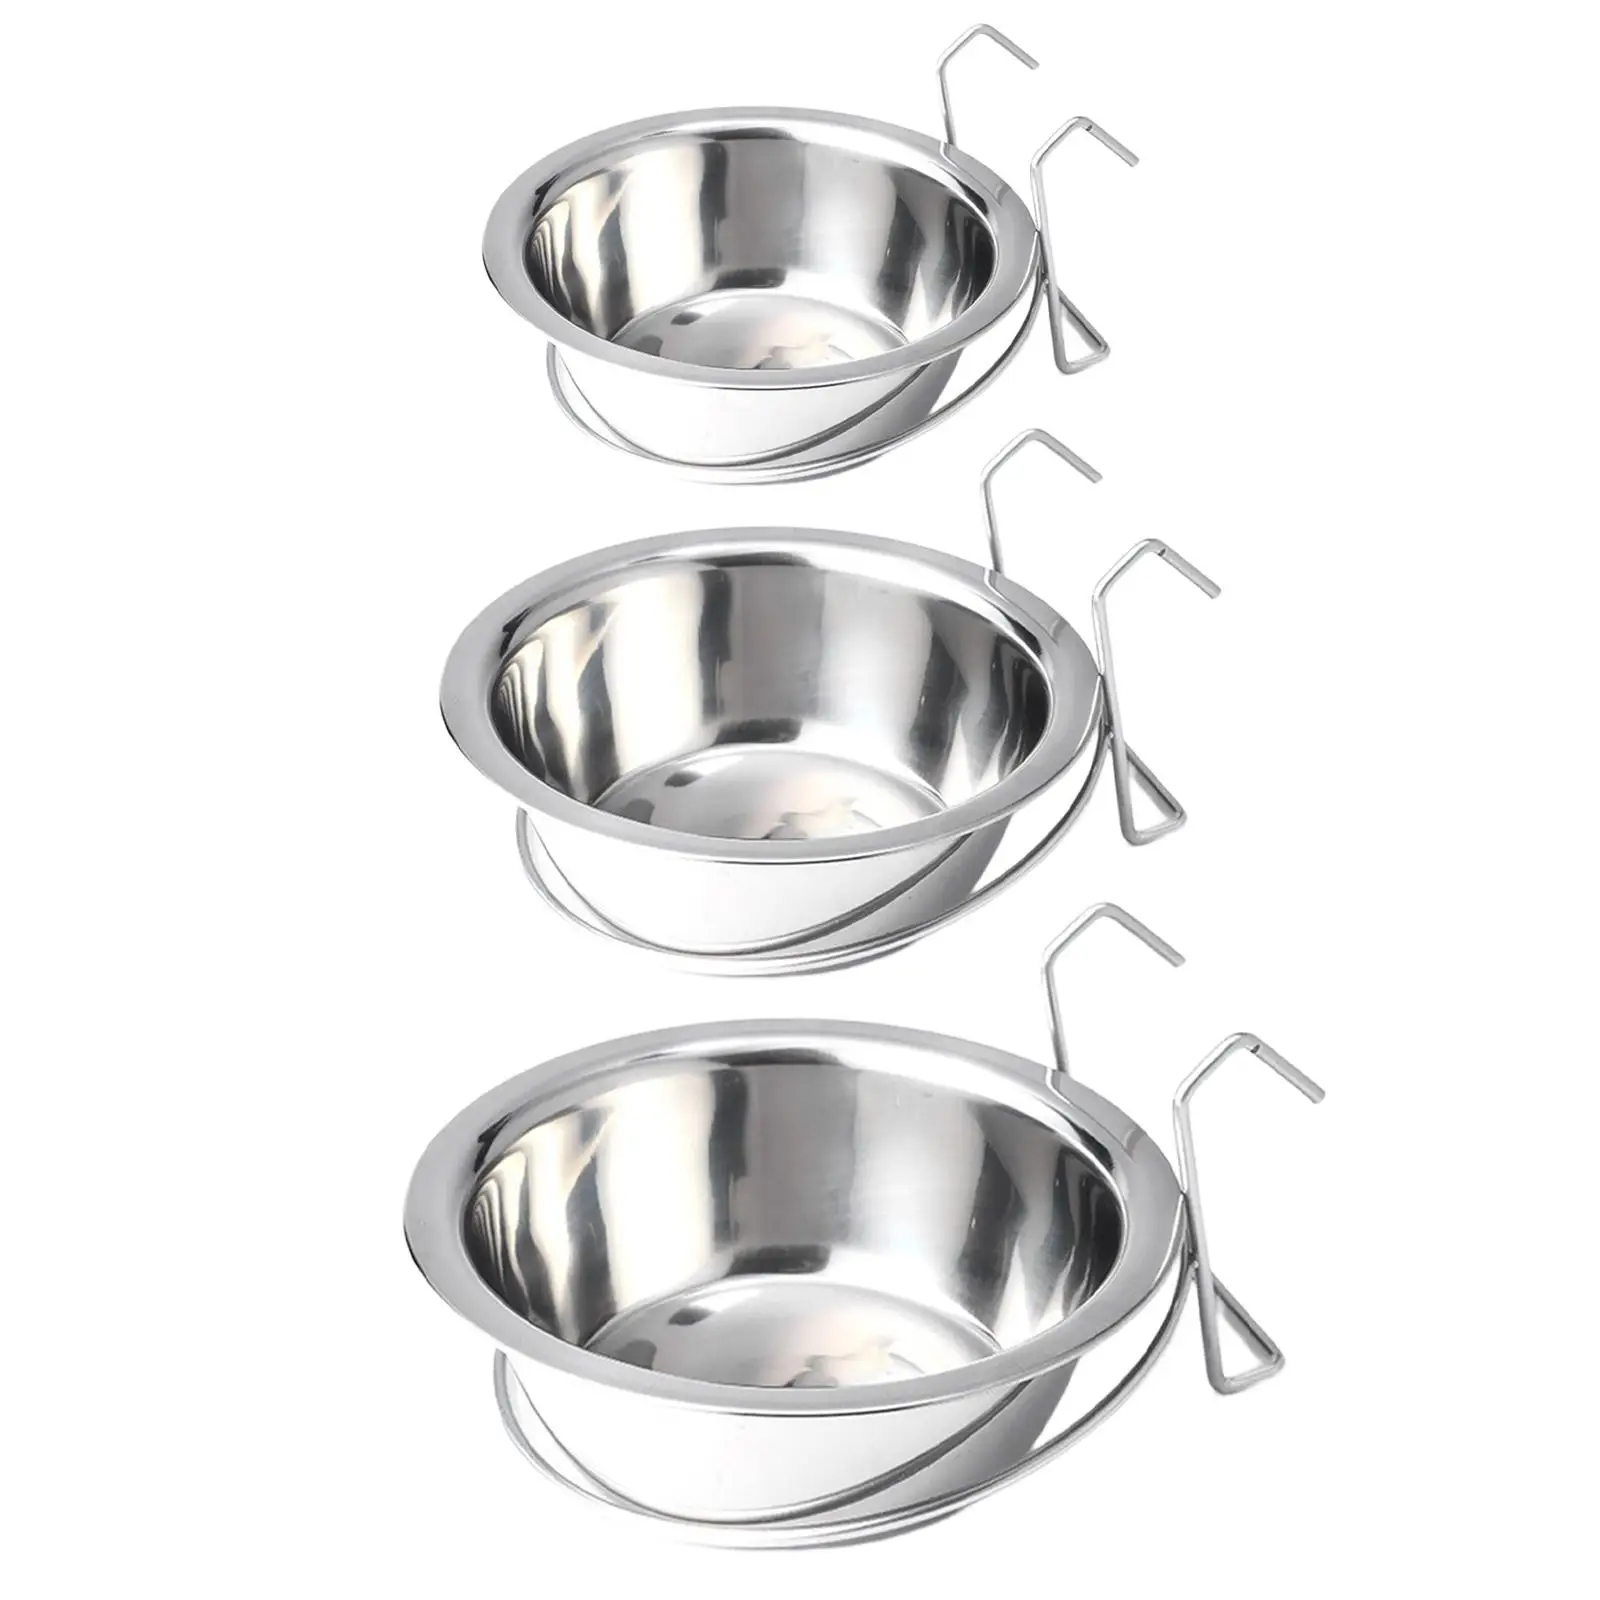 

Hanging Pet Bowl Water Bowls Cat Feeding Bowl, Hanging , Dog Crate Bowl, Dog Bowls for Bunny Small Animals Dogs Kitten